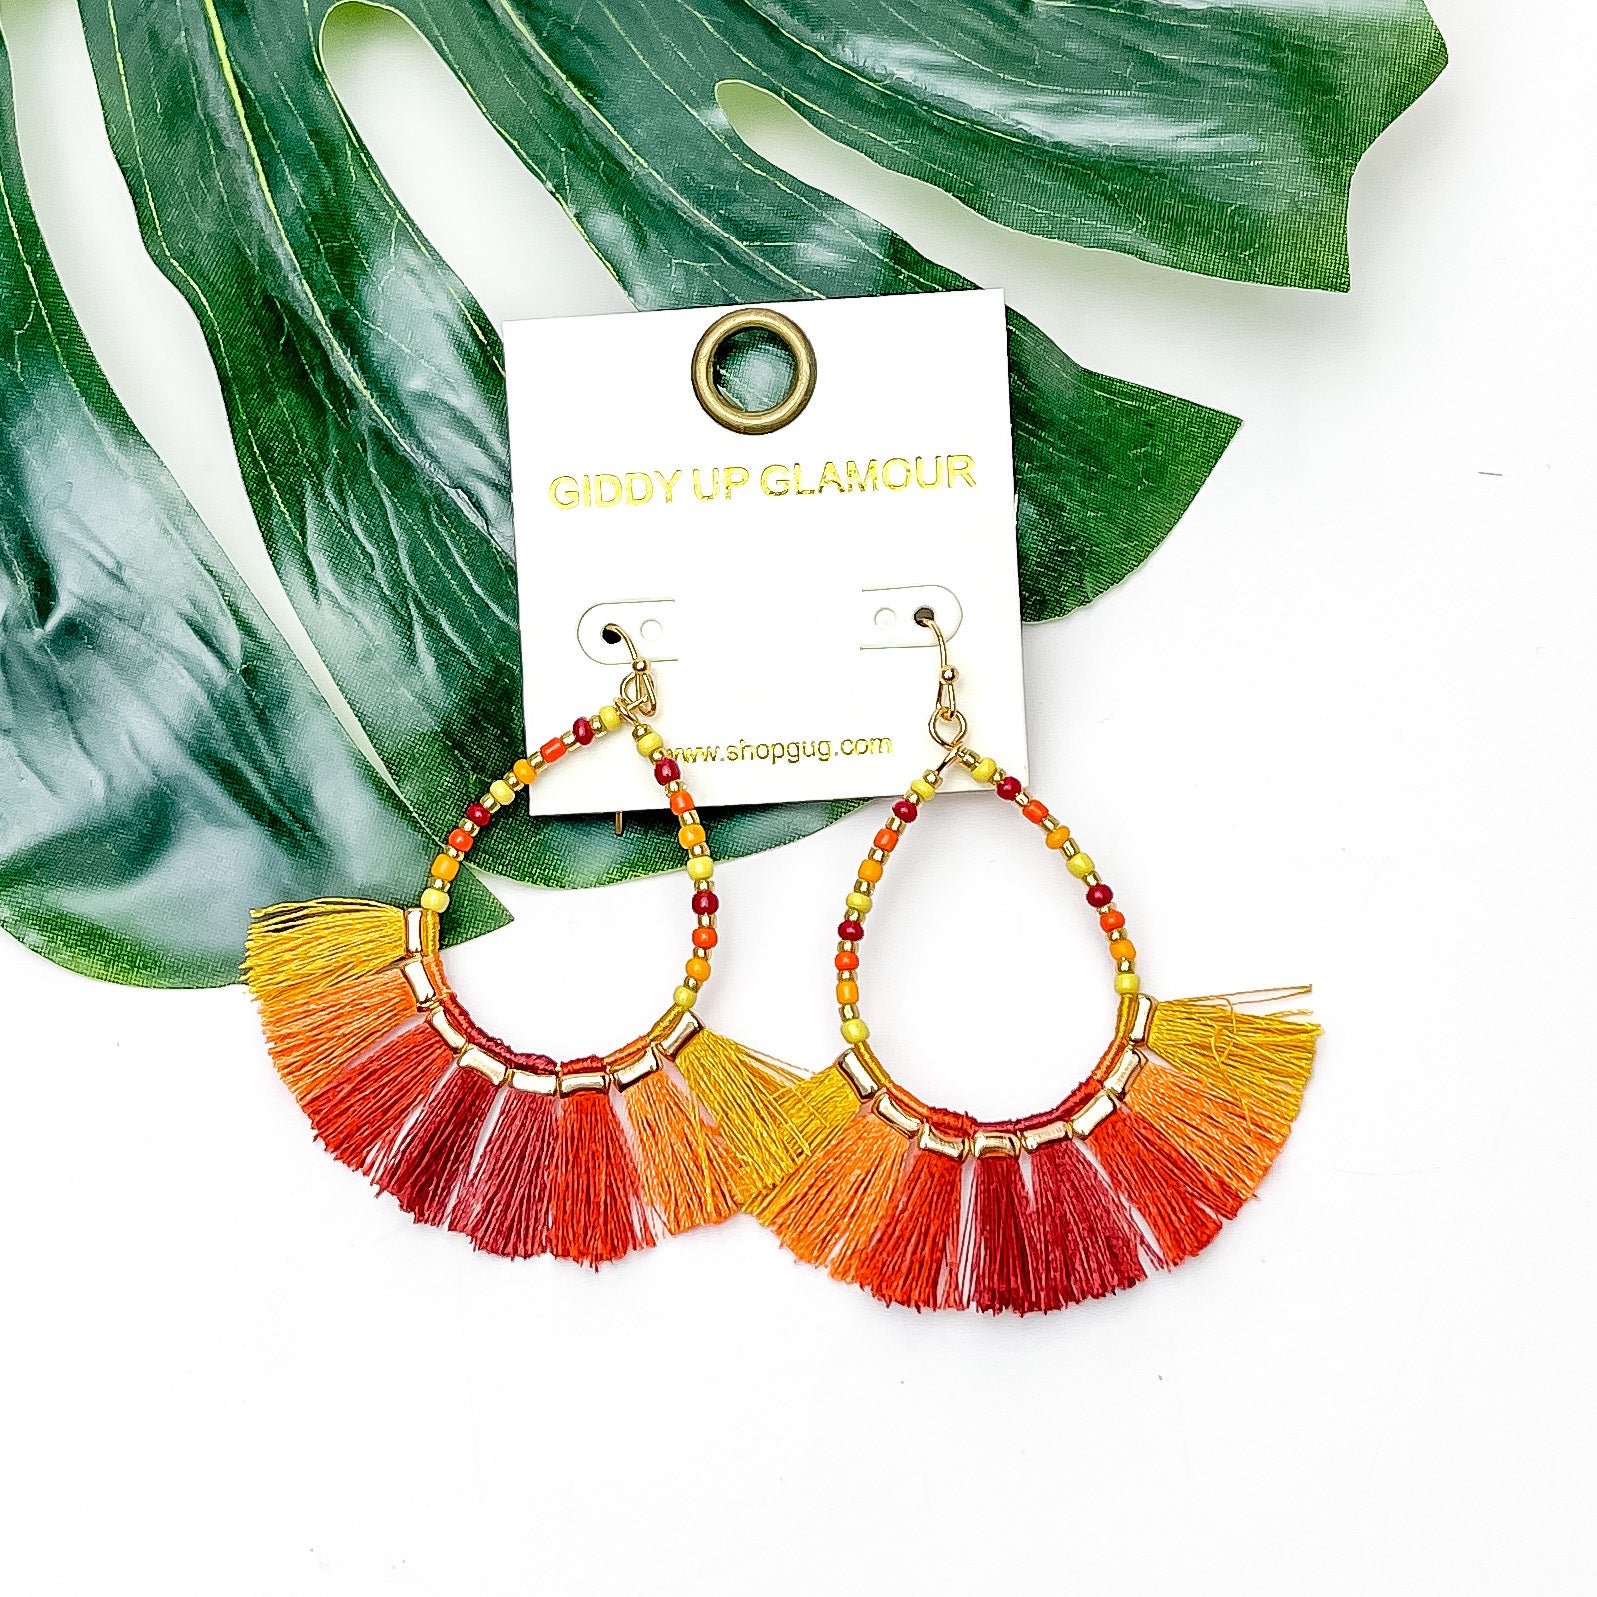 Beaded Open Teardrop Earrings With Fringe Bottom in Orange Tones. Pictured on a white background with a leaf behind the earrings.